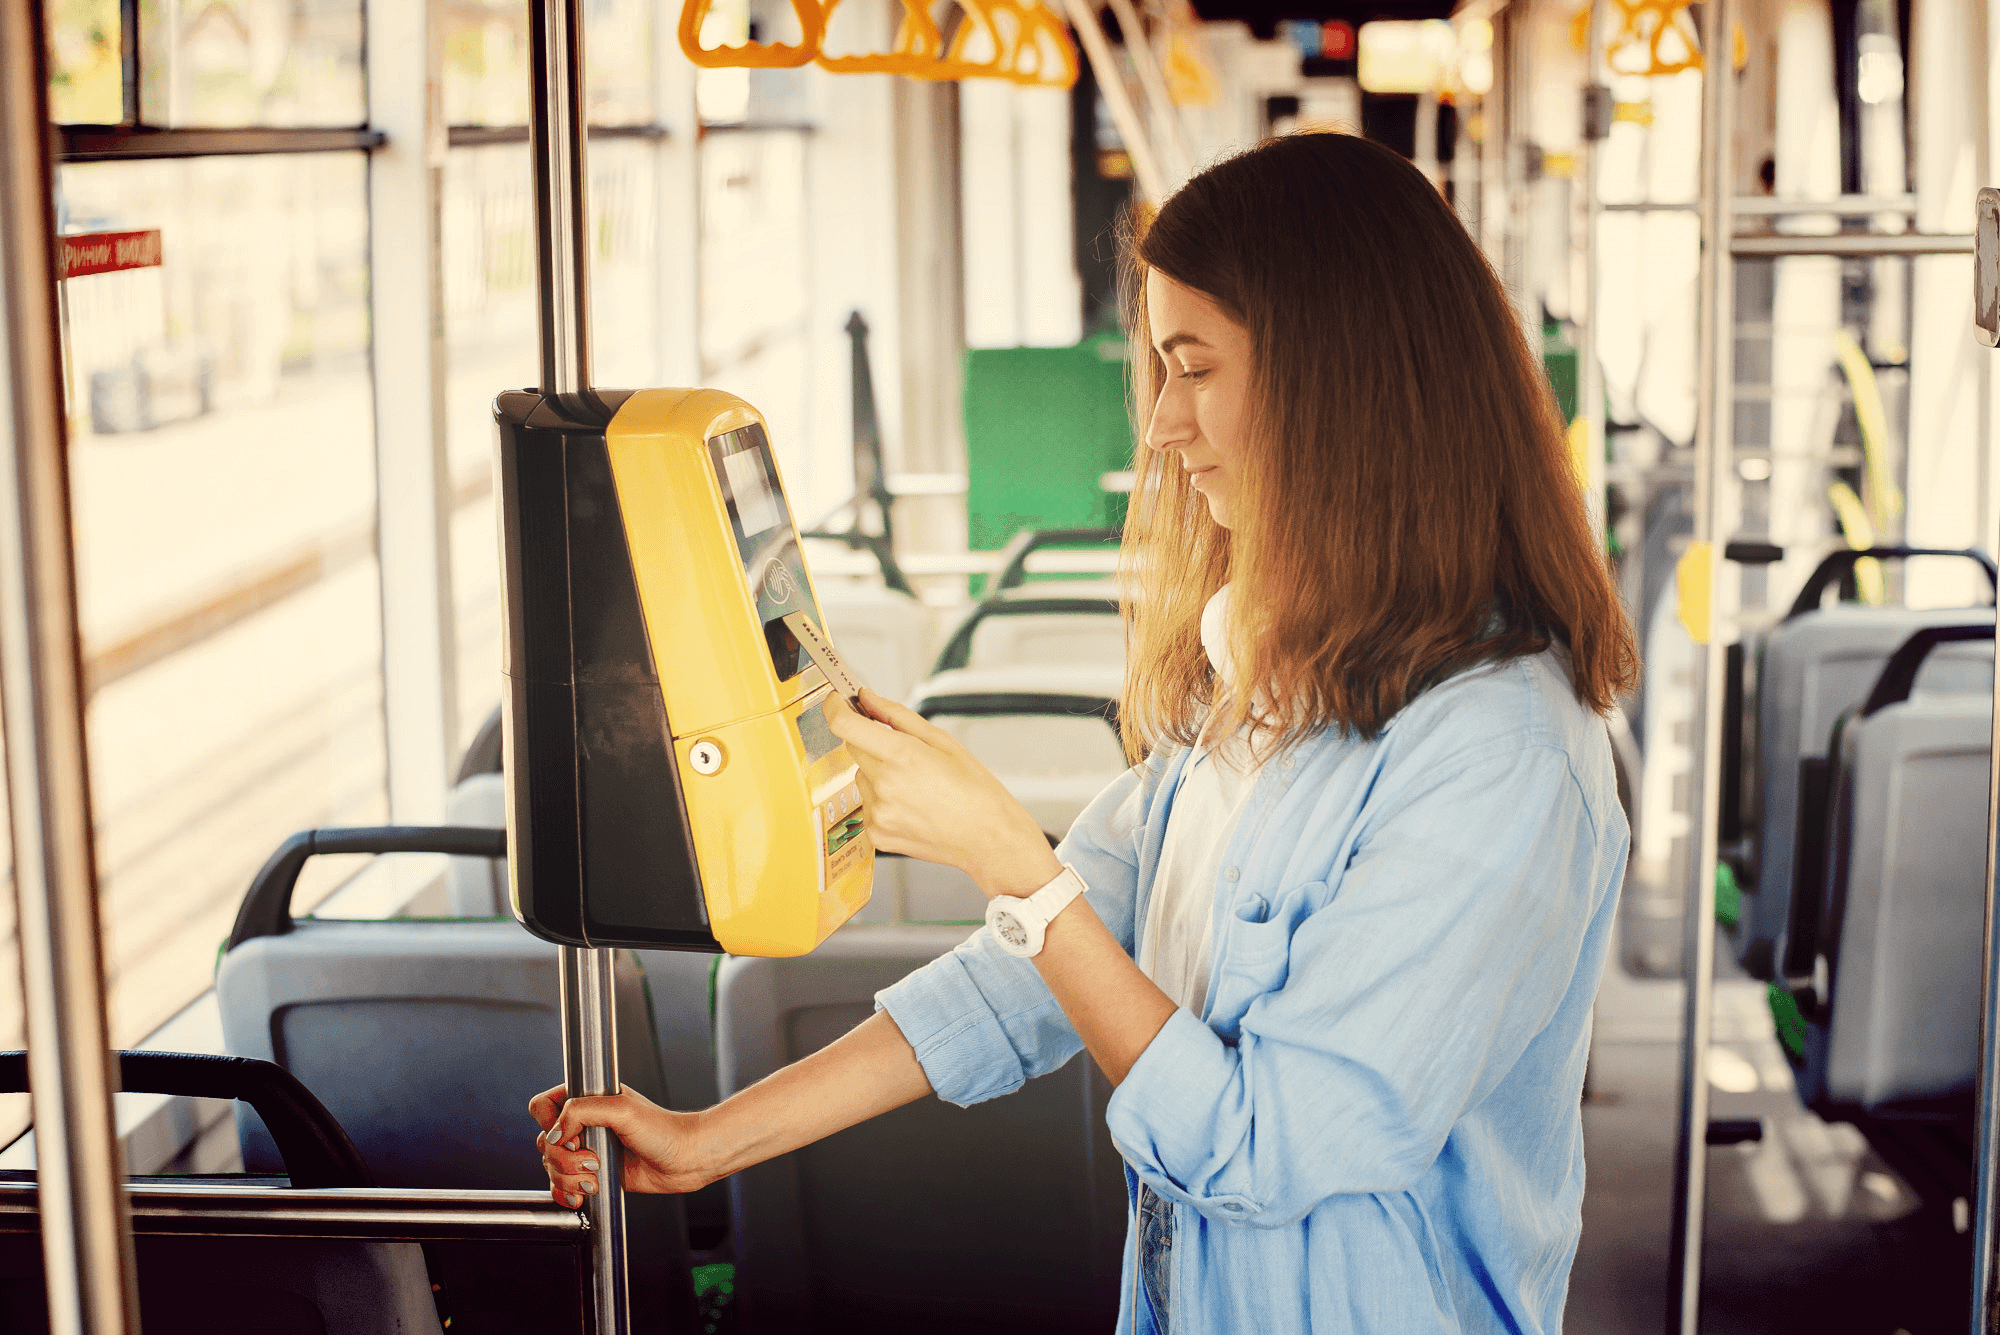 person using an Oyster card or tapping a contactless payment card